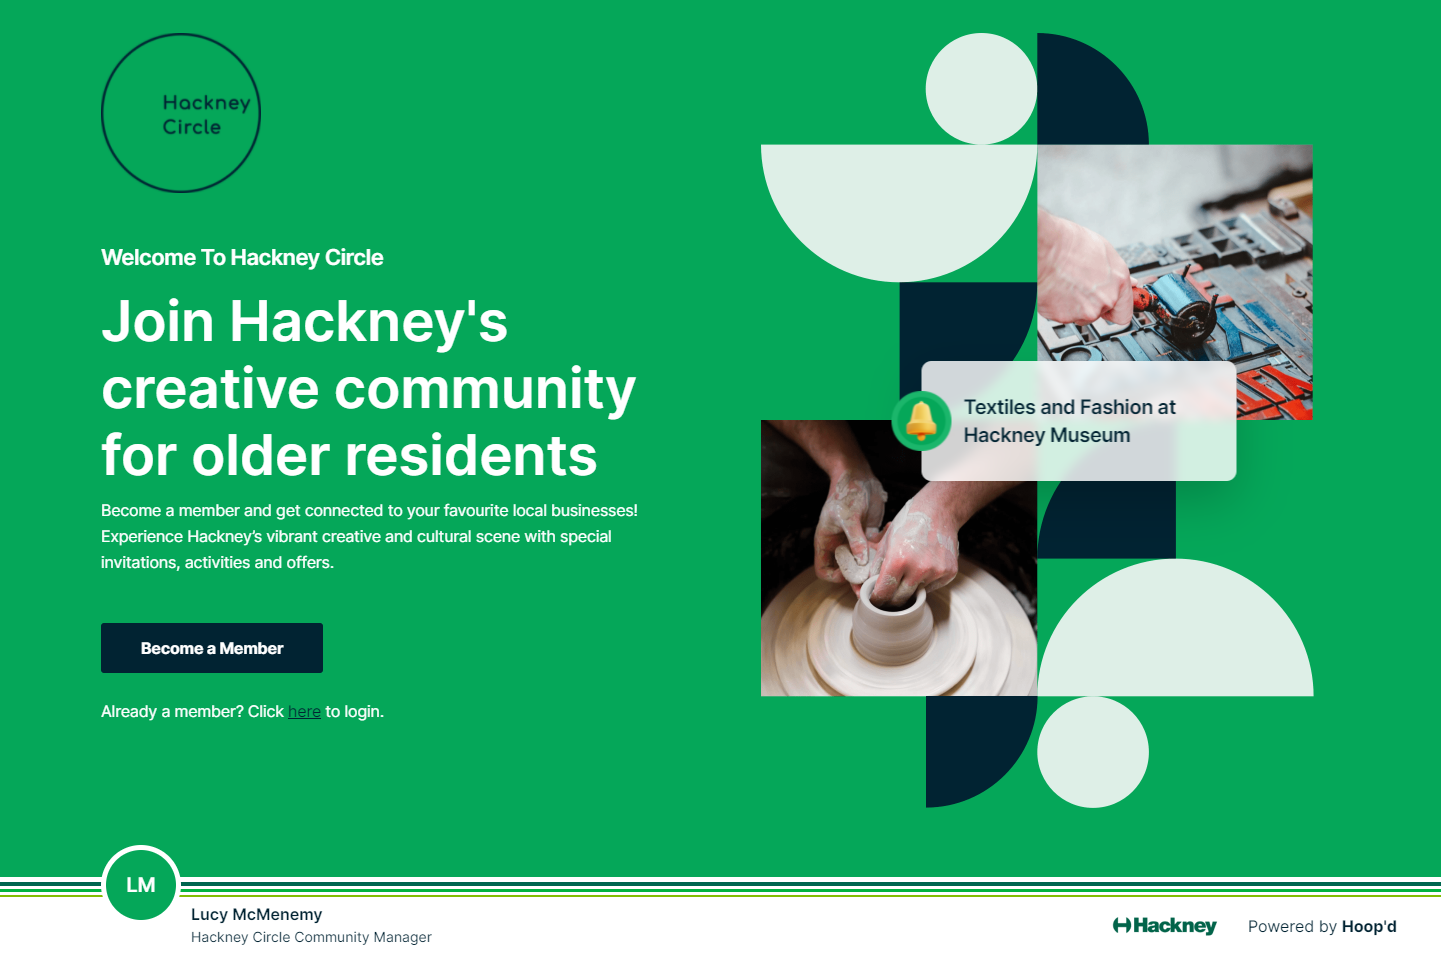 Hackney Circle microsite designed for Hackney Council